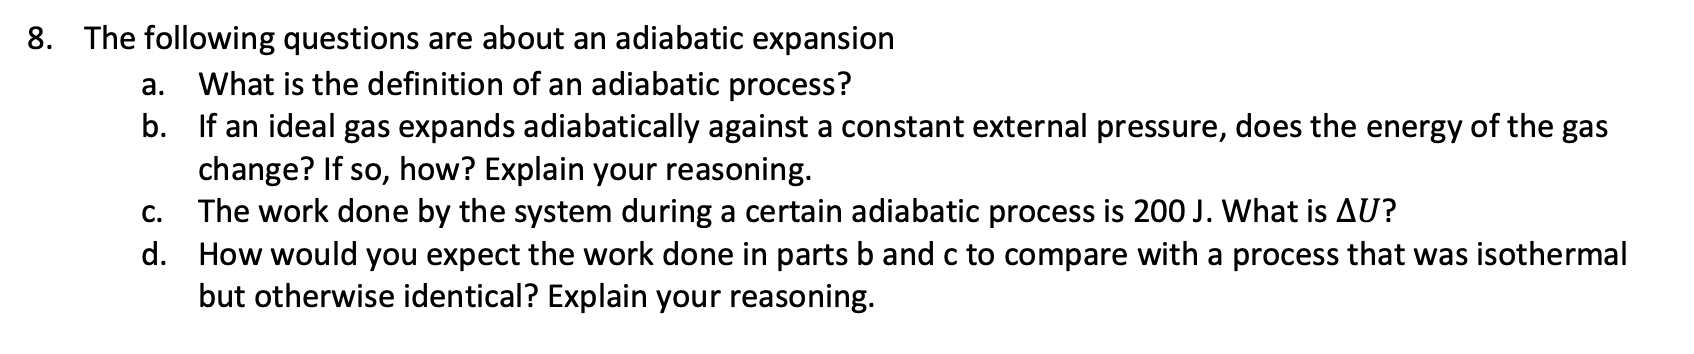 8. The following questions are about an adiabatic expansion
What is the definition of an adiabatic process?
b. If an ideal gas expands adiabatically against a constant external pressure, does the energy of the gas
change? If so, how? Explain your reasoning.
The work done by the system during a certain adiabatic process is 200 J. What is AU?
а.
С.
